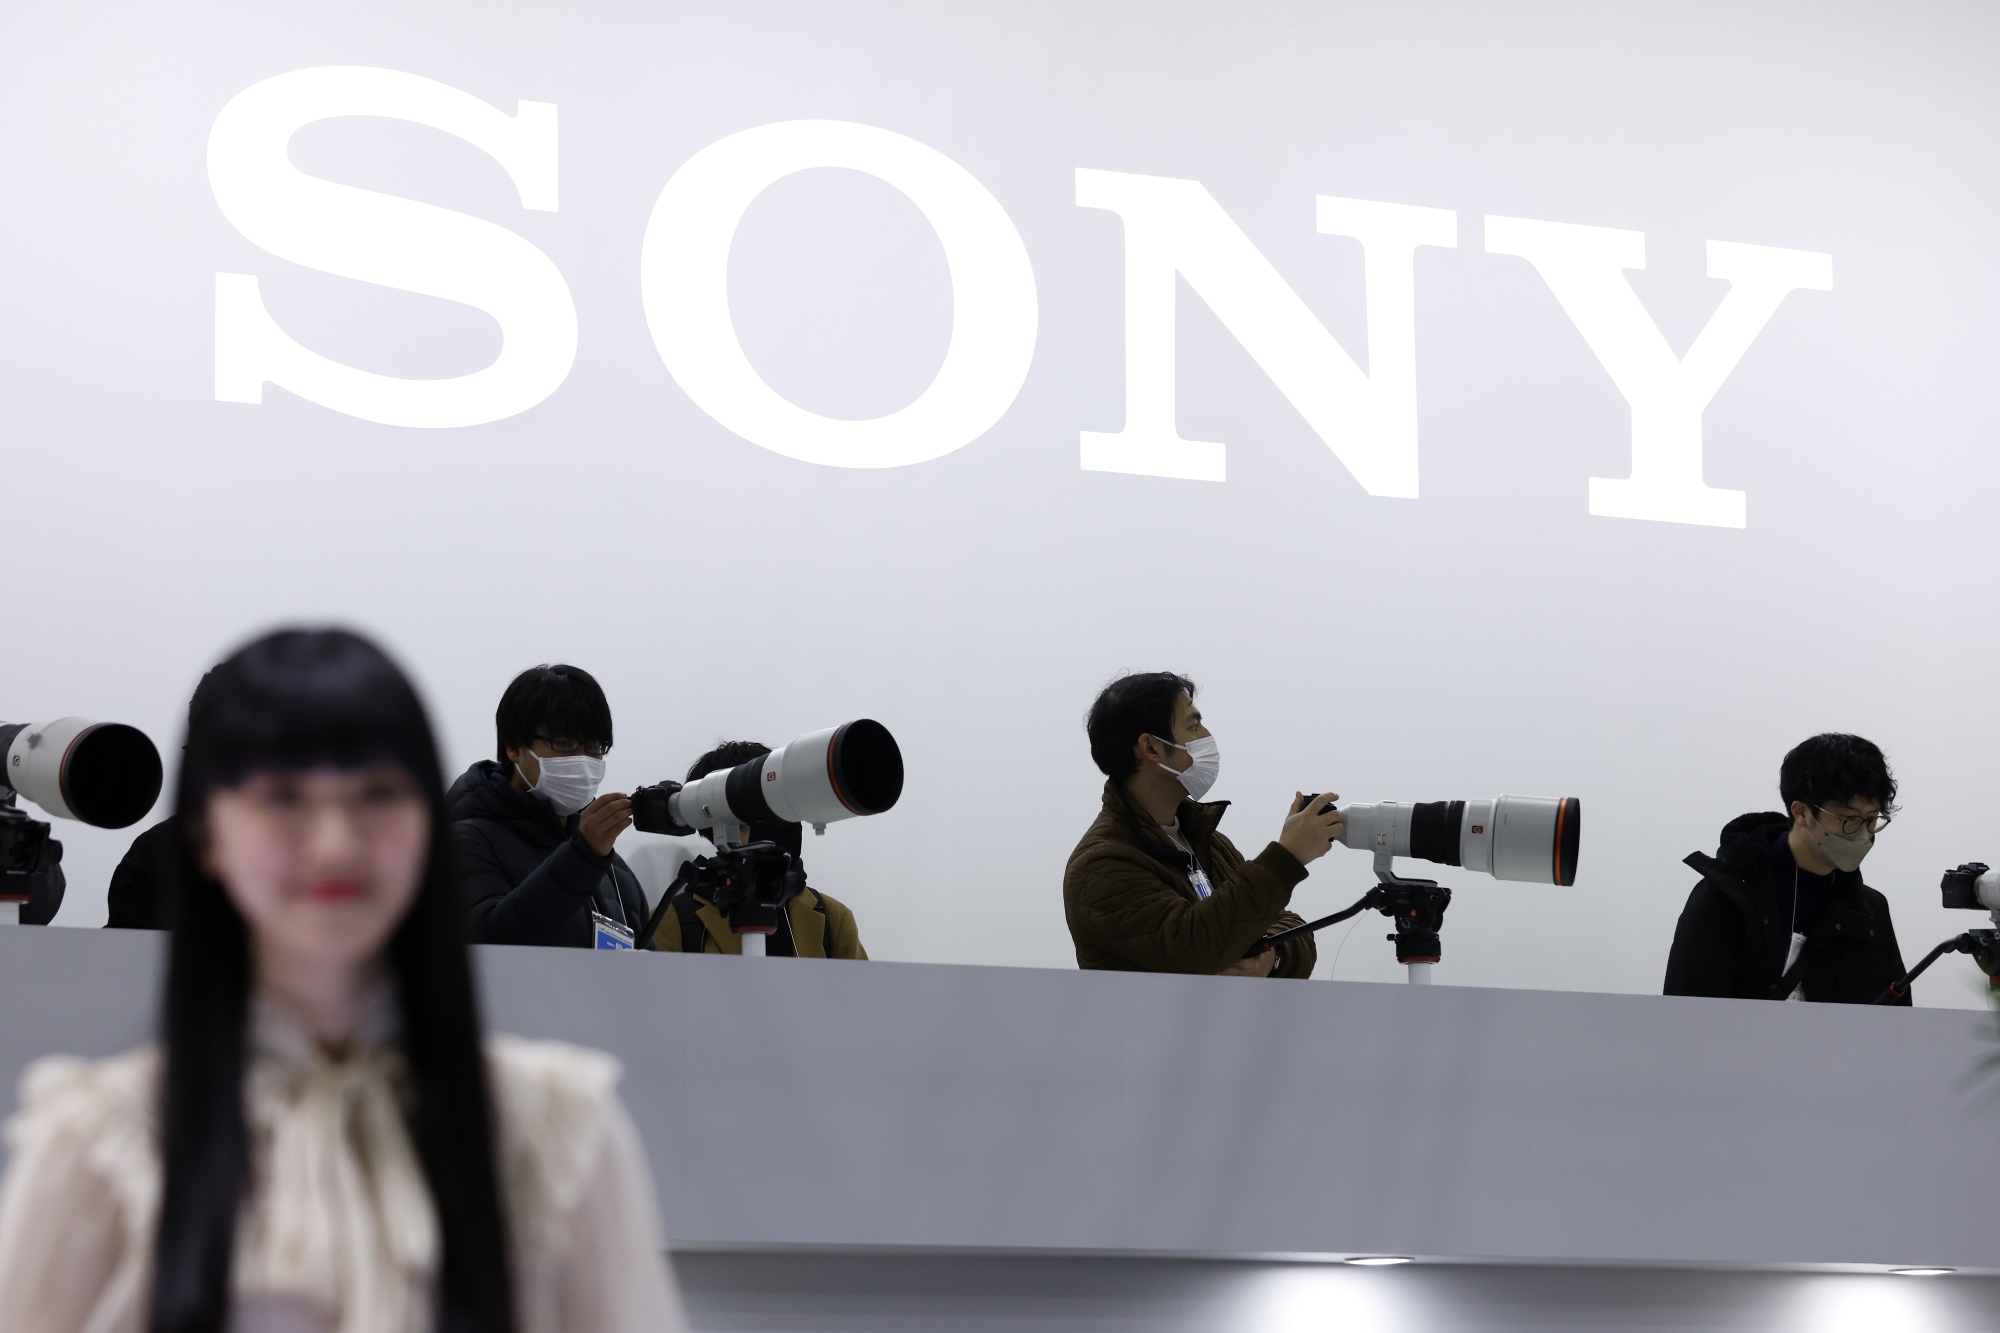 Sony Stock Takes $20 Billion Hit After Microsoft Announces